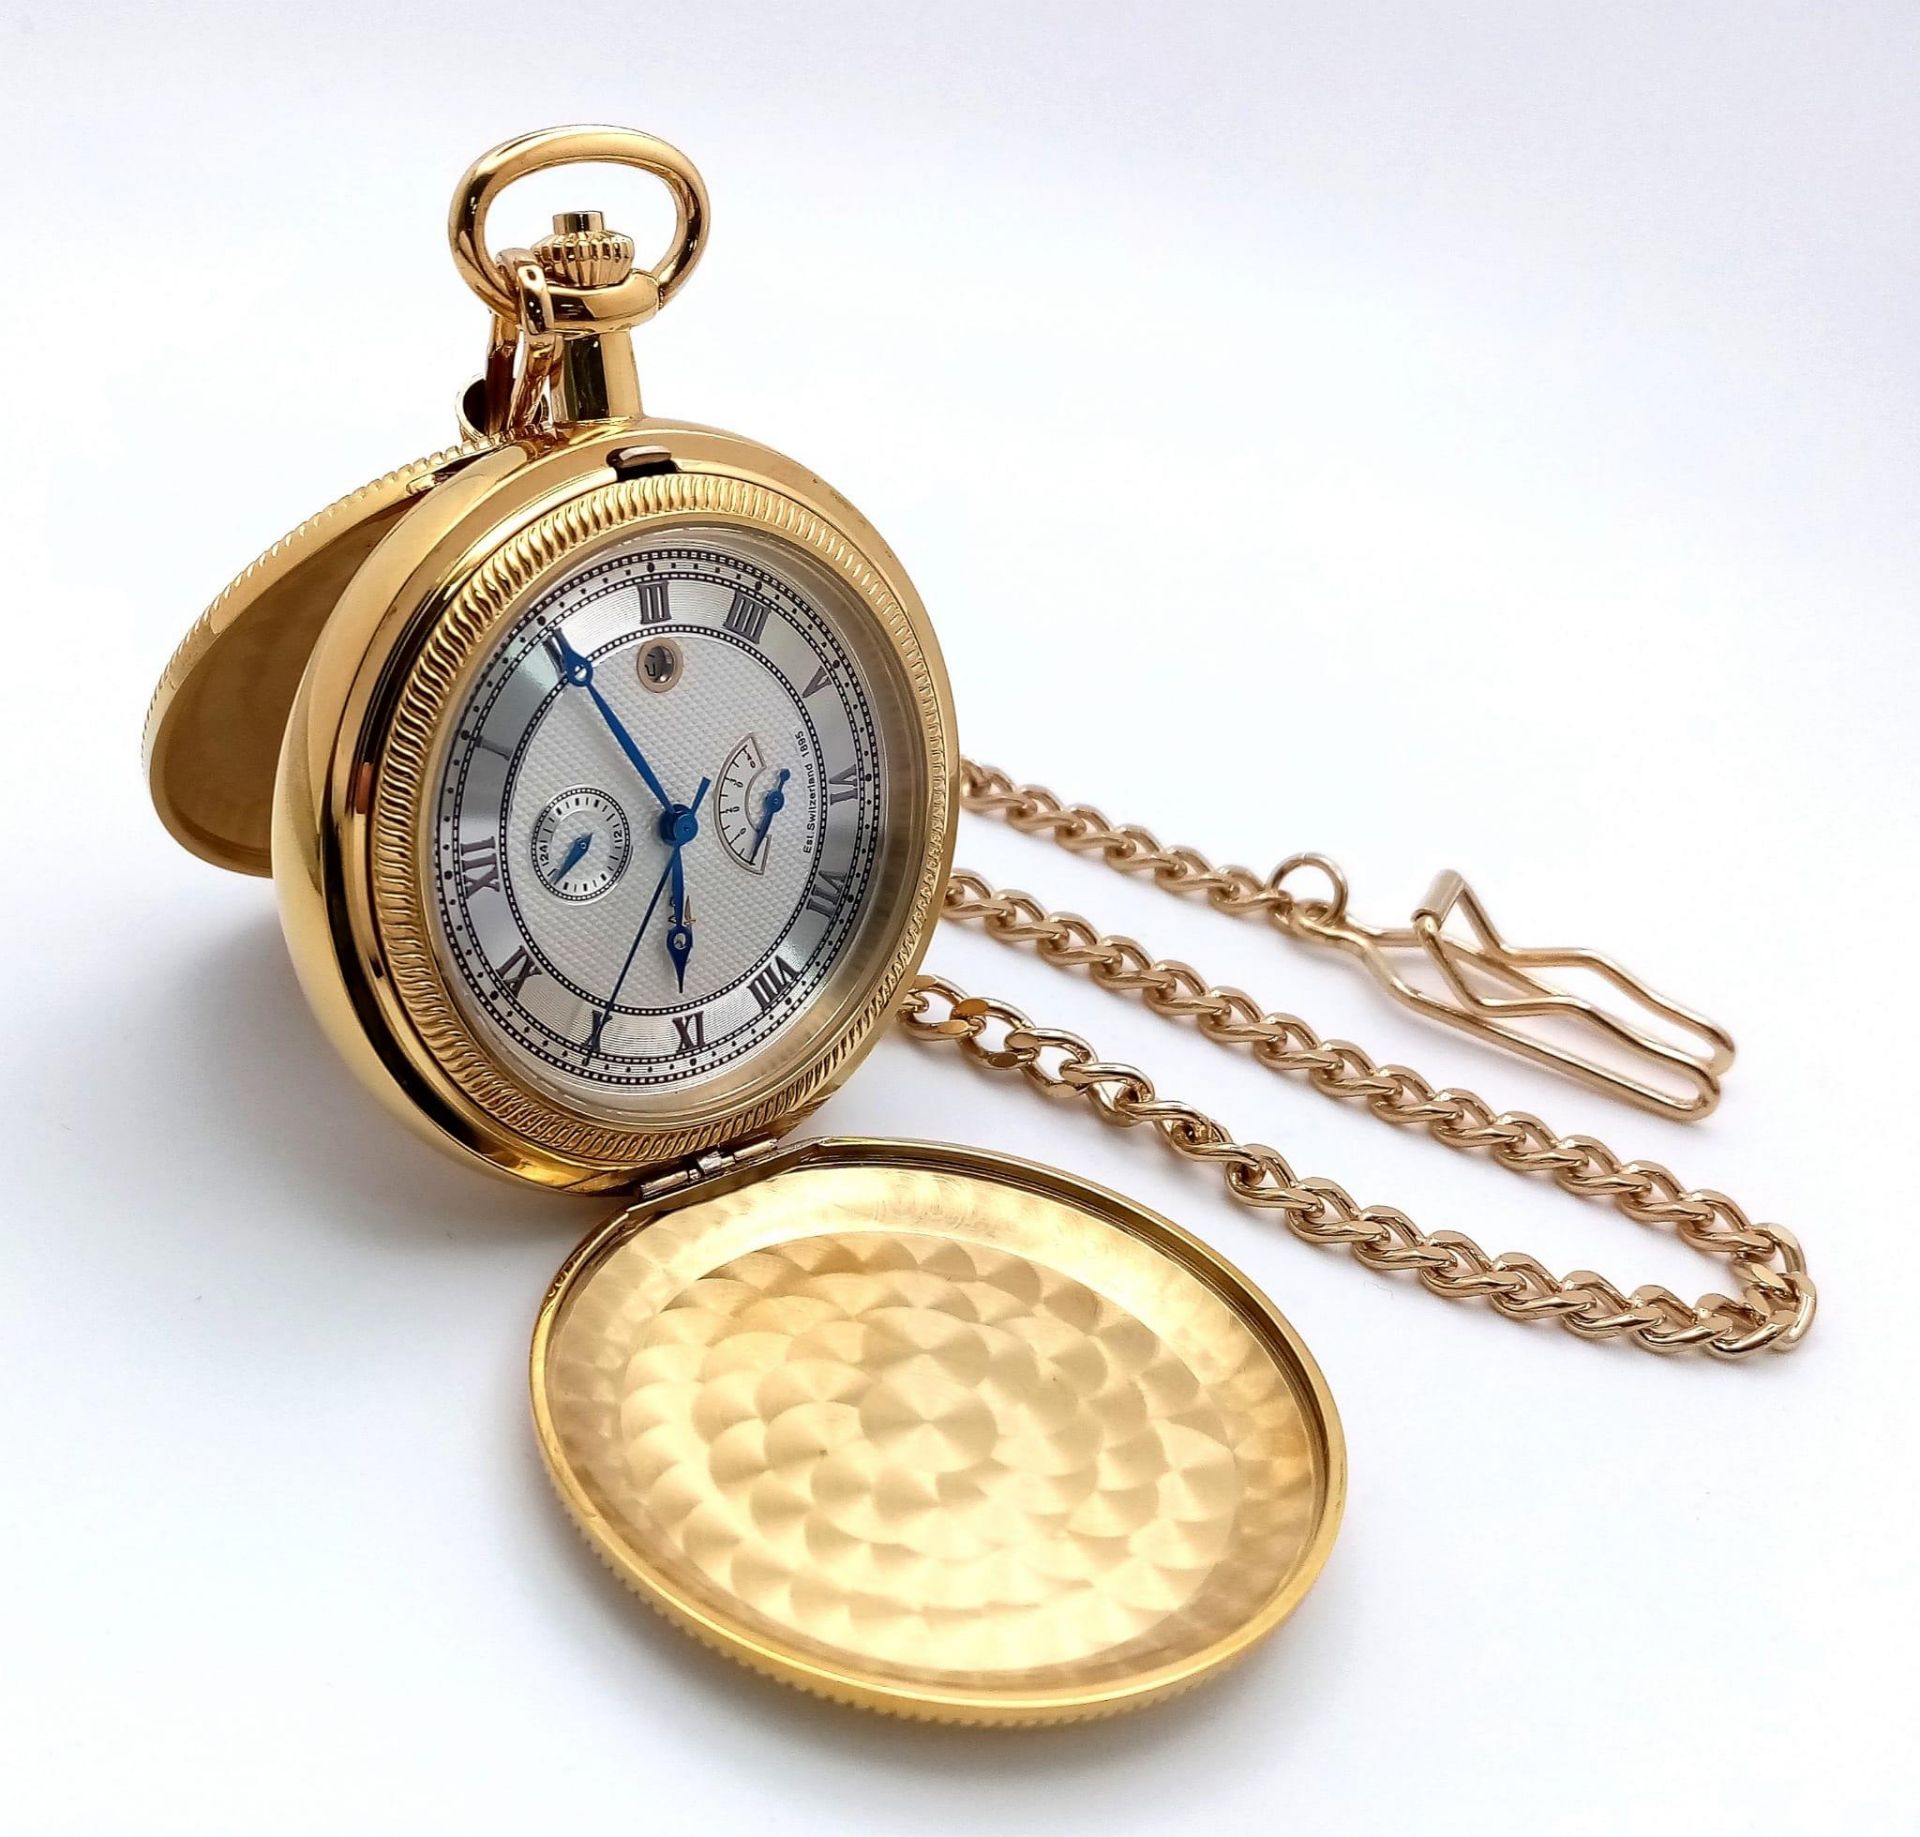 An Unworn Gold Plated Rotary Manual Wind Pocket, Date Watch. 4 Day Power Reserve. With Albert Chain.